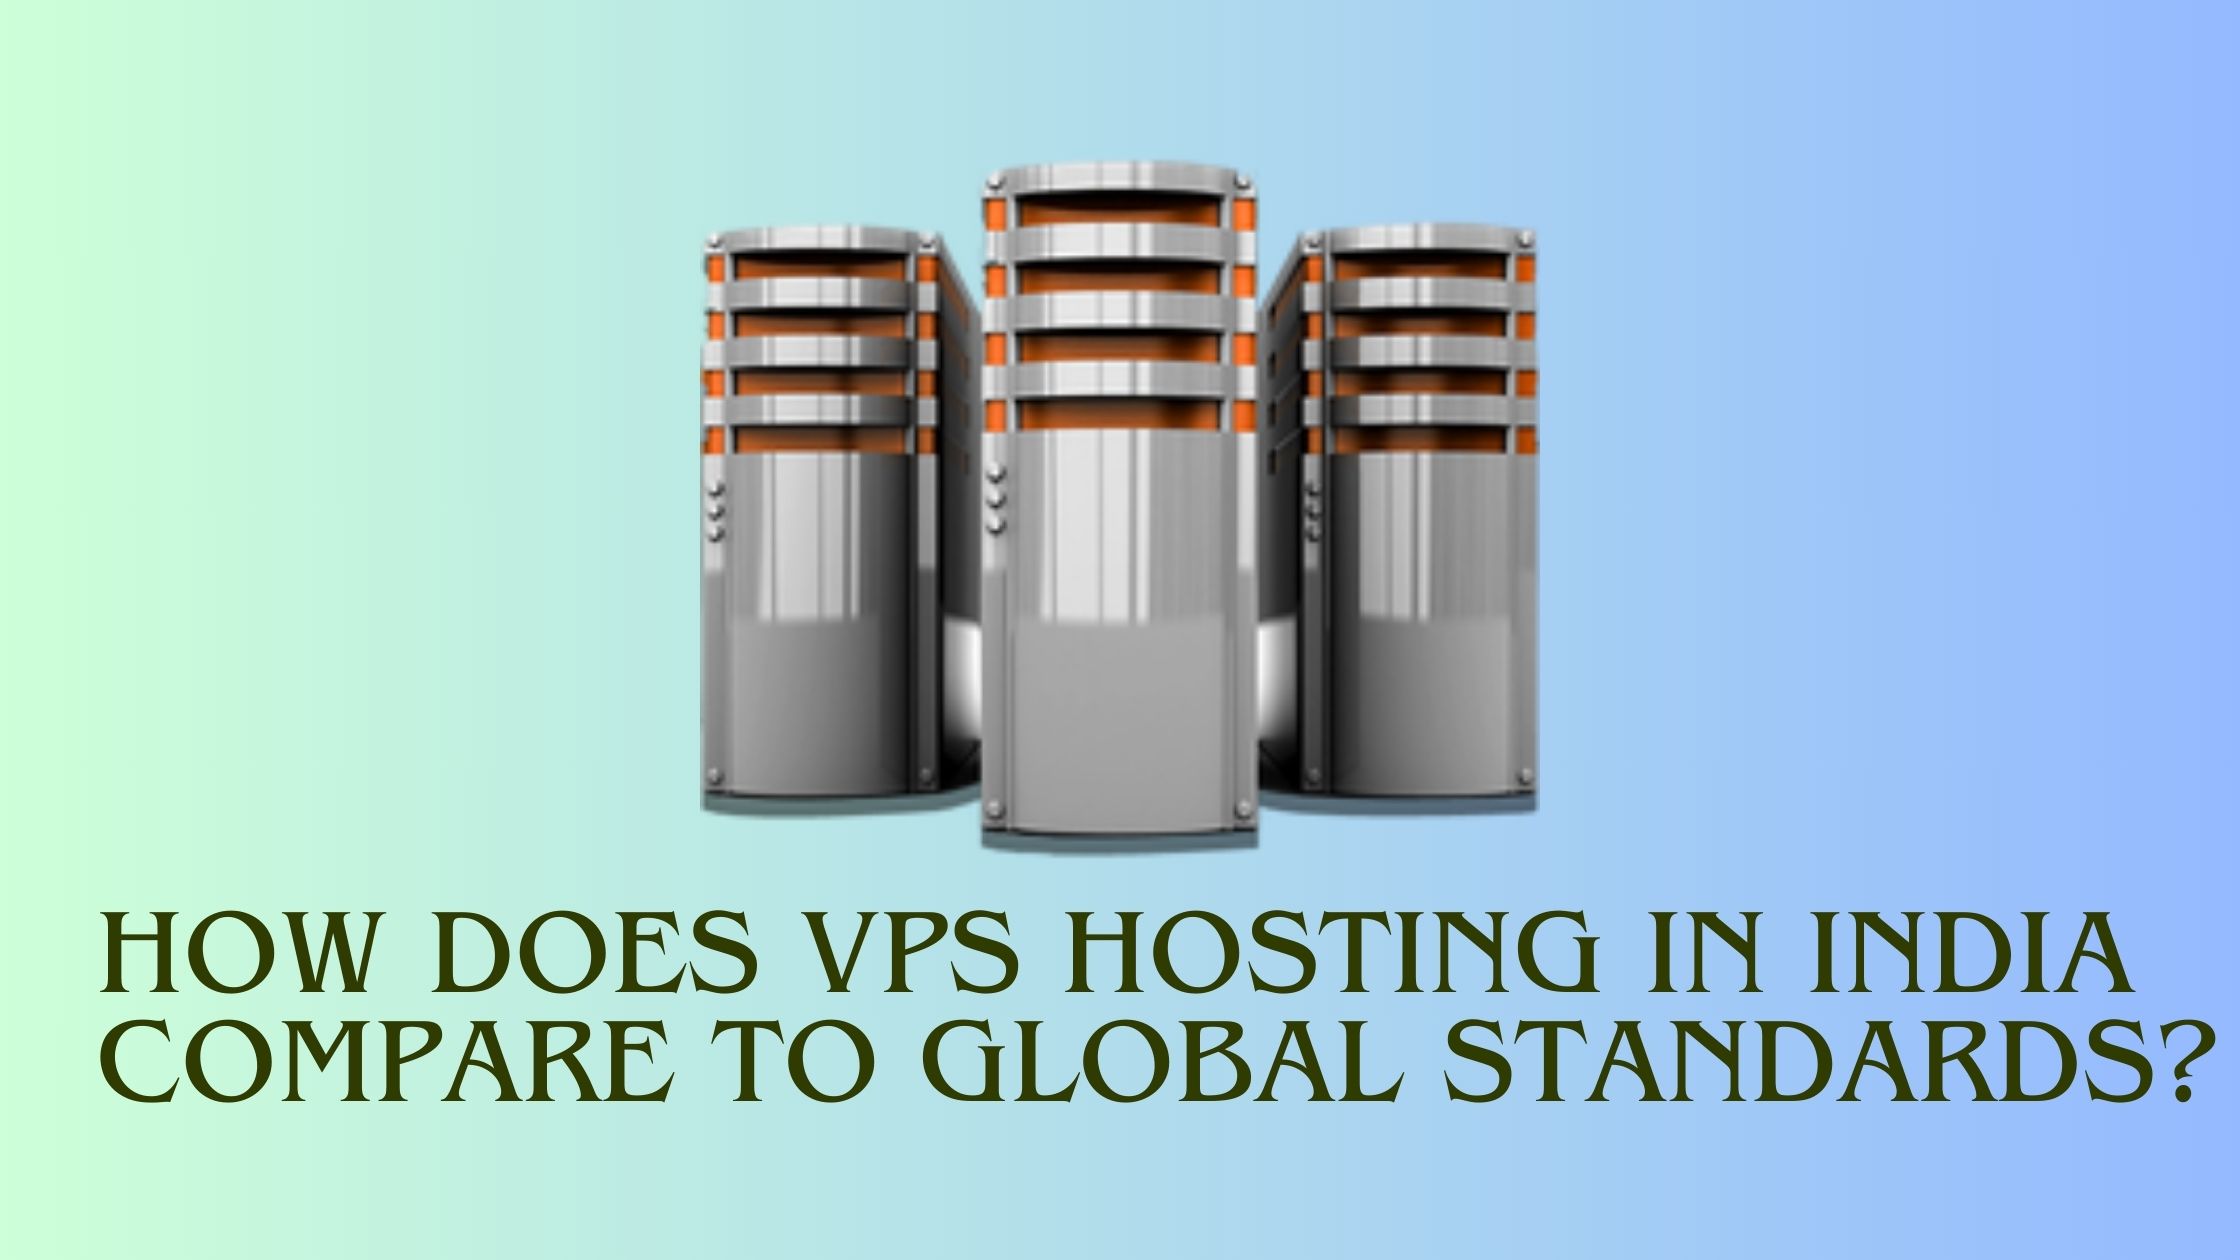 How Does VPS Hosting in India Compare to Global Standards?